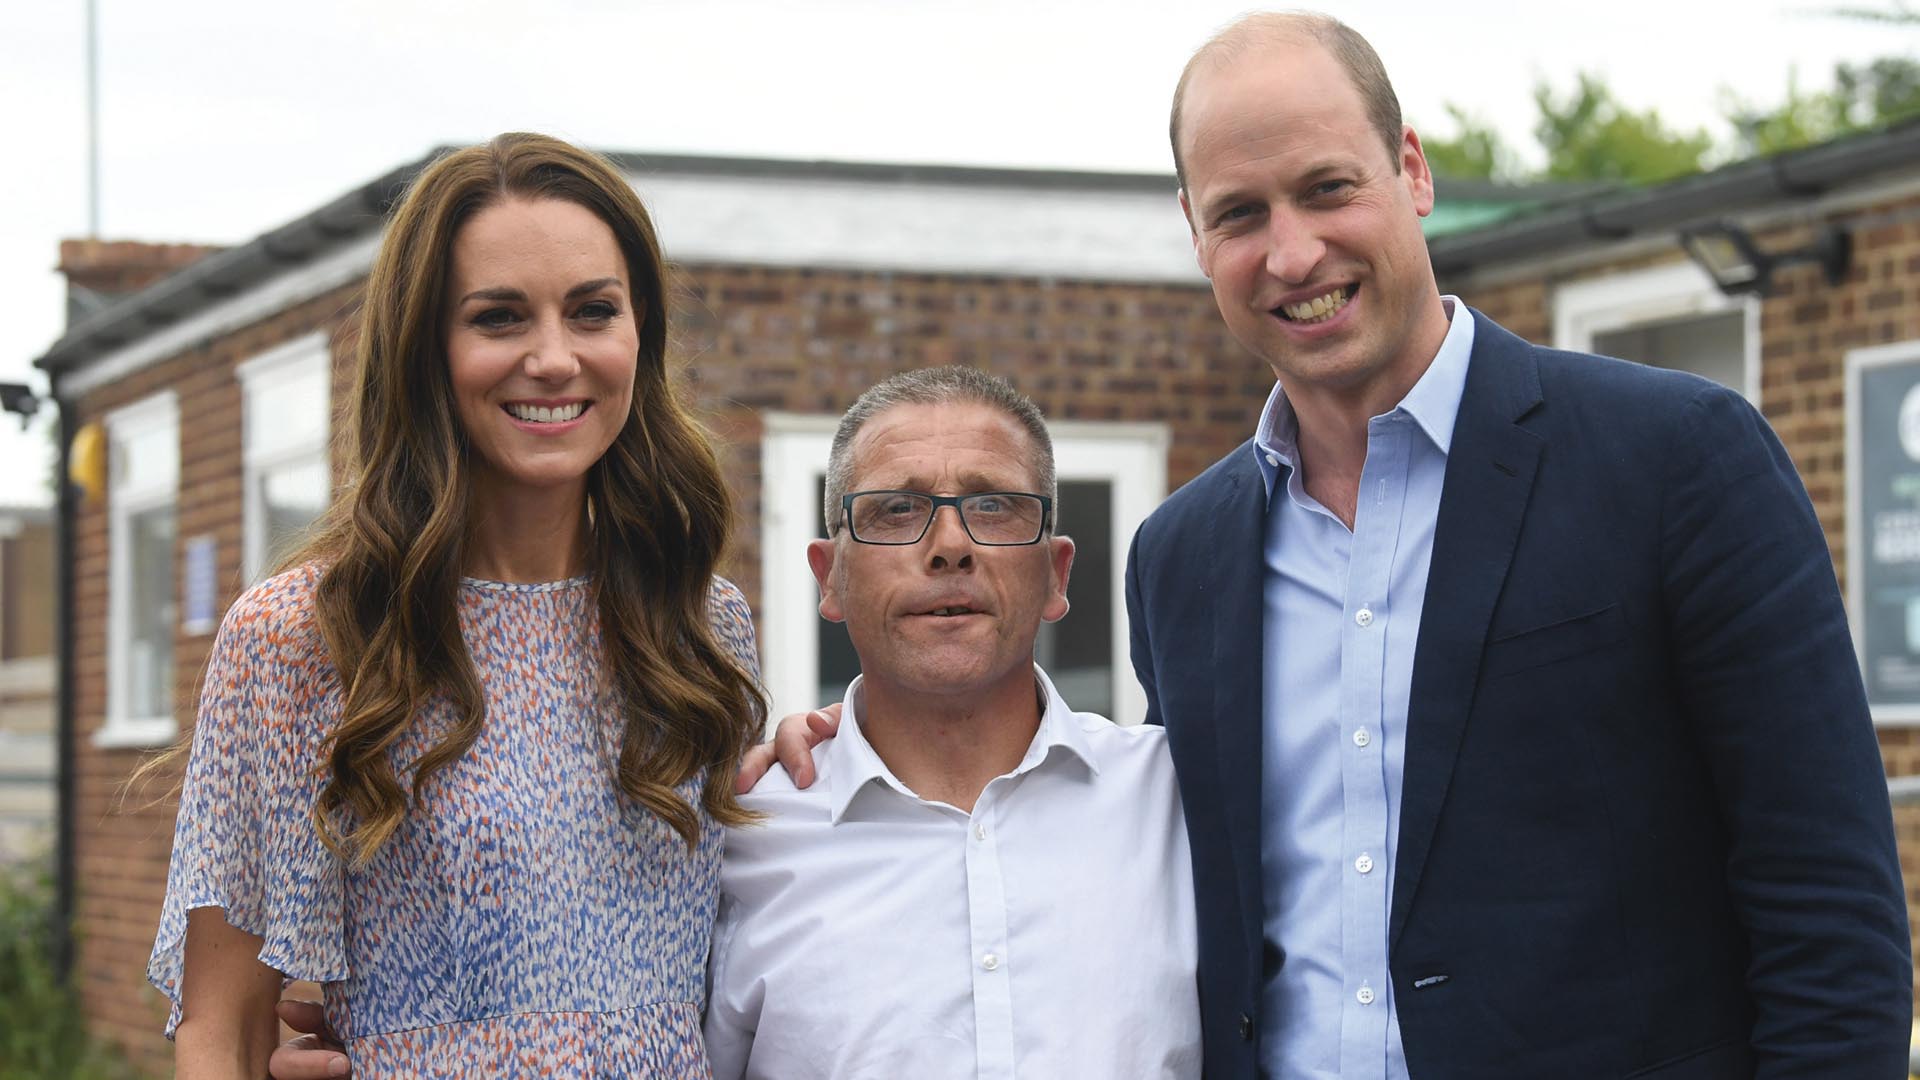 Eamonn Kelly meets Prince William and wife Kate